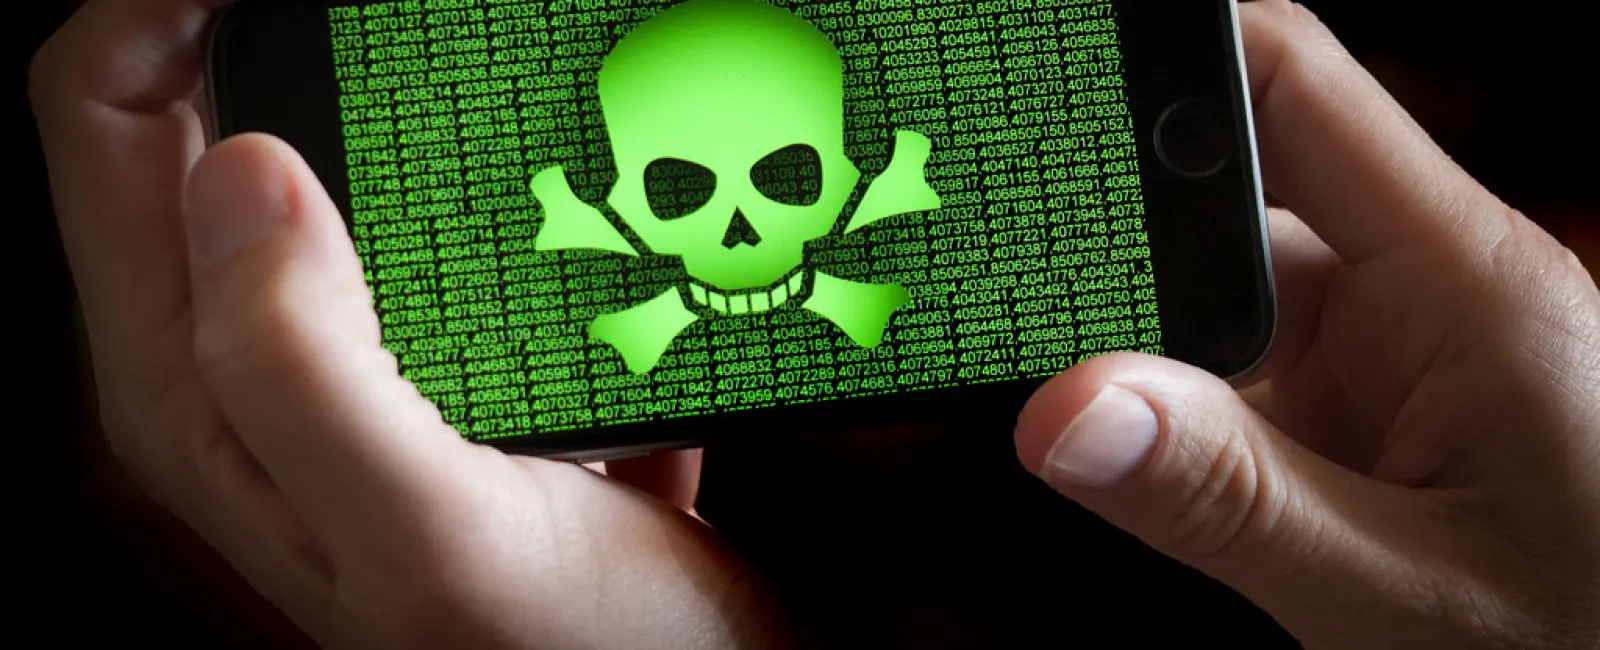 Malware Infection Results in a $650,000 Settlement